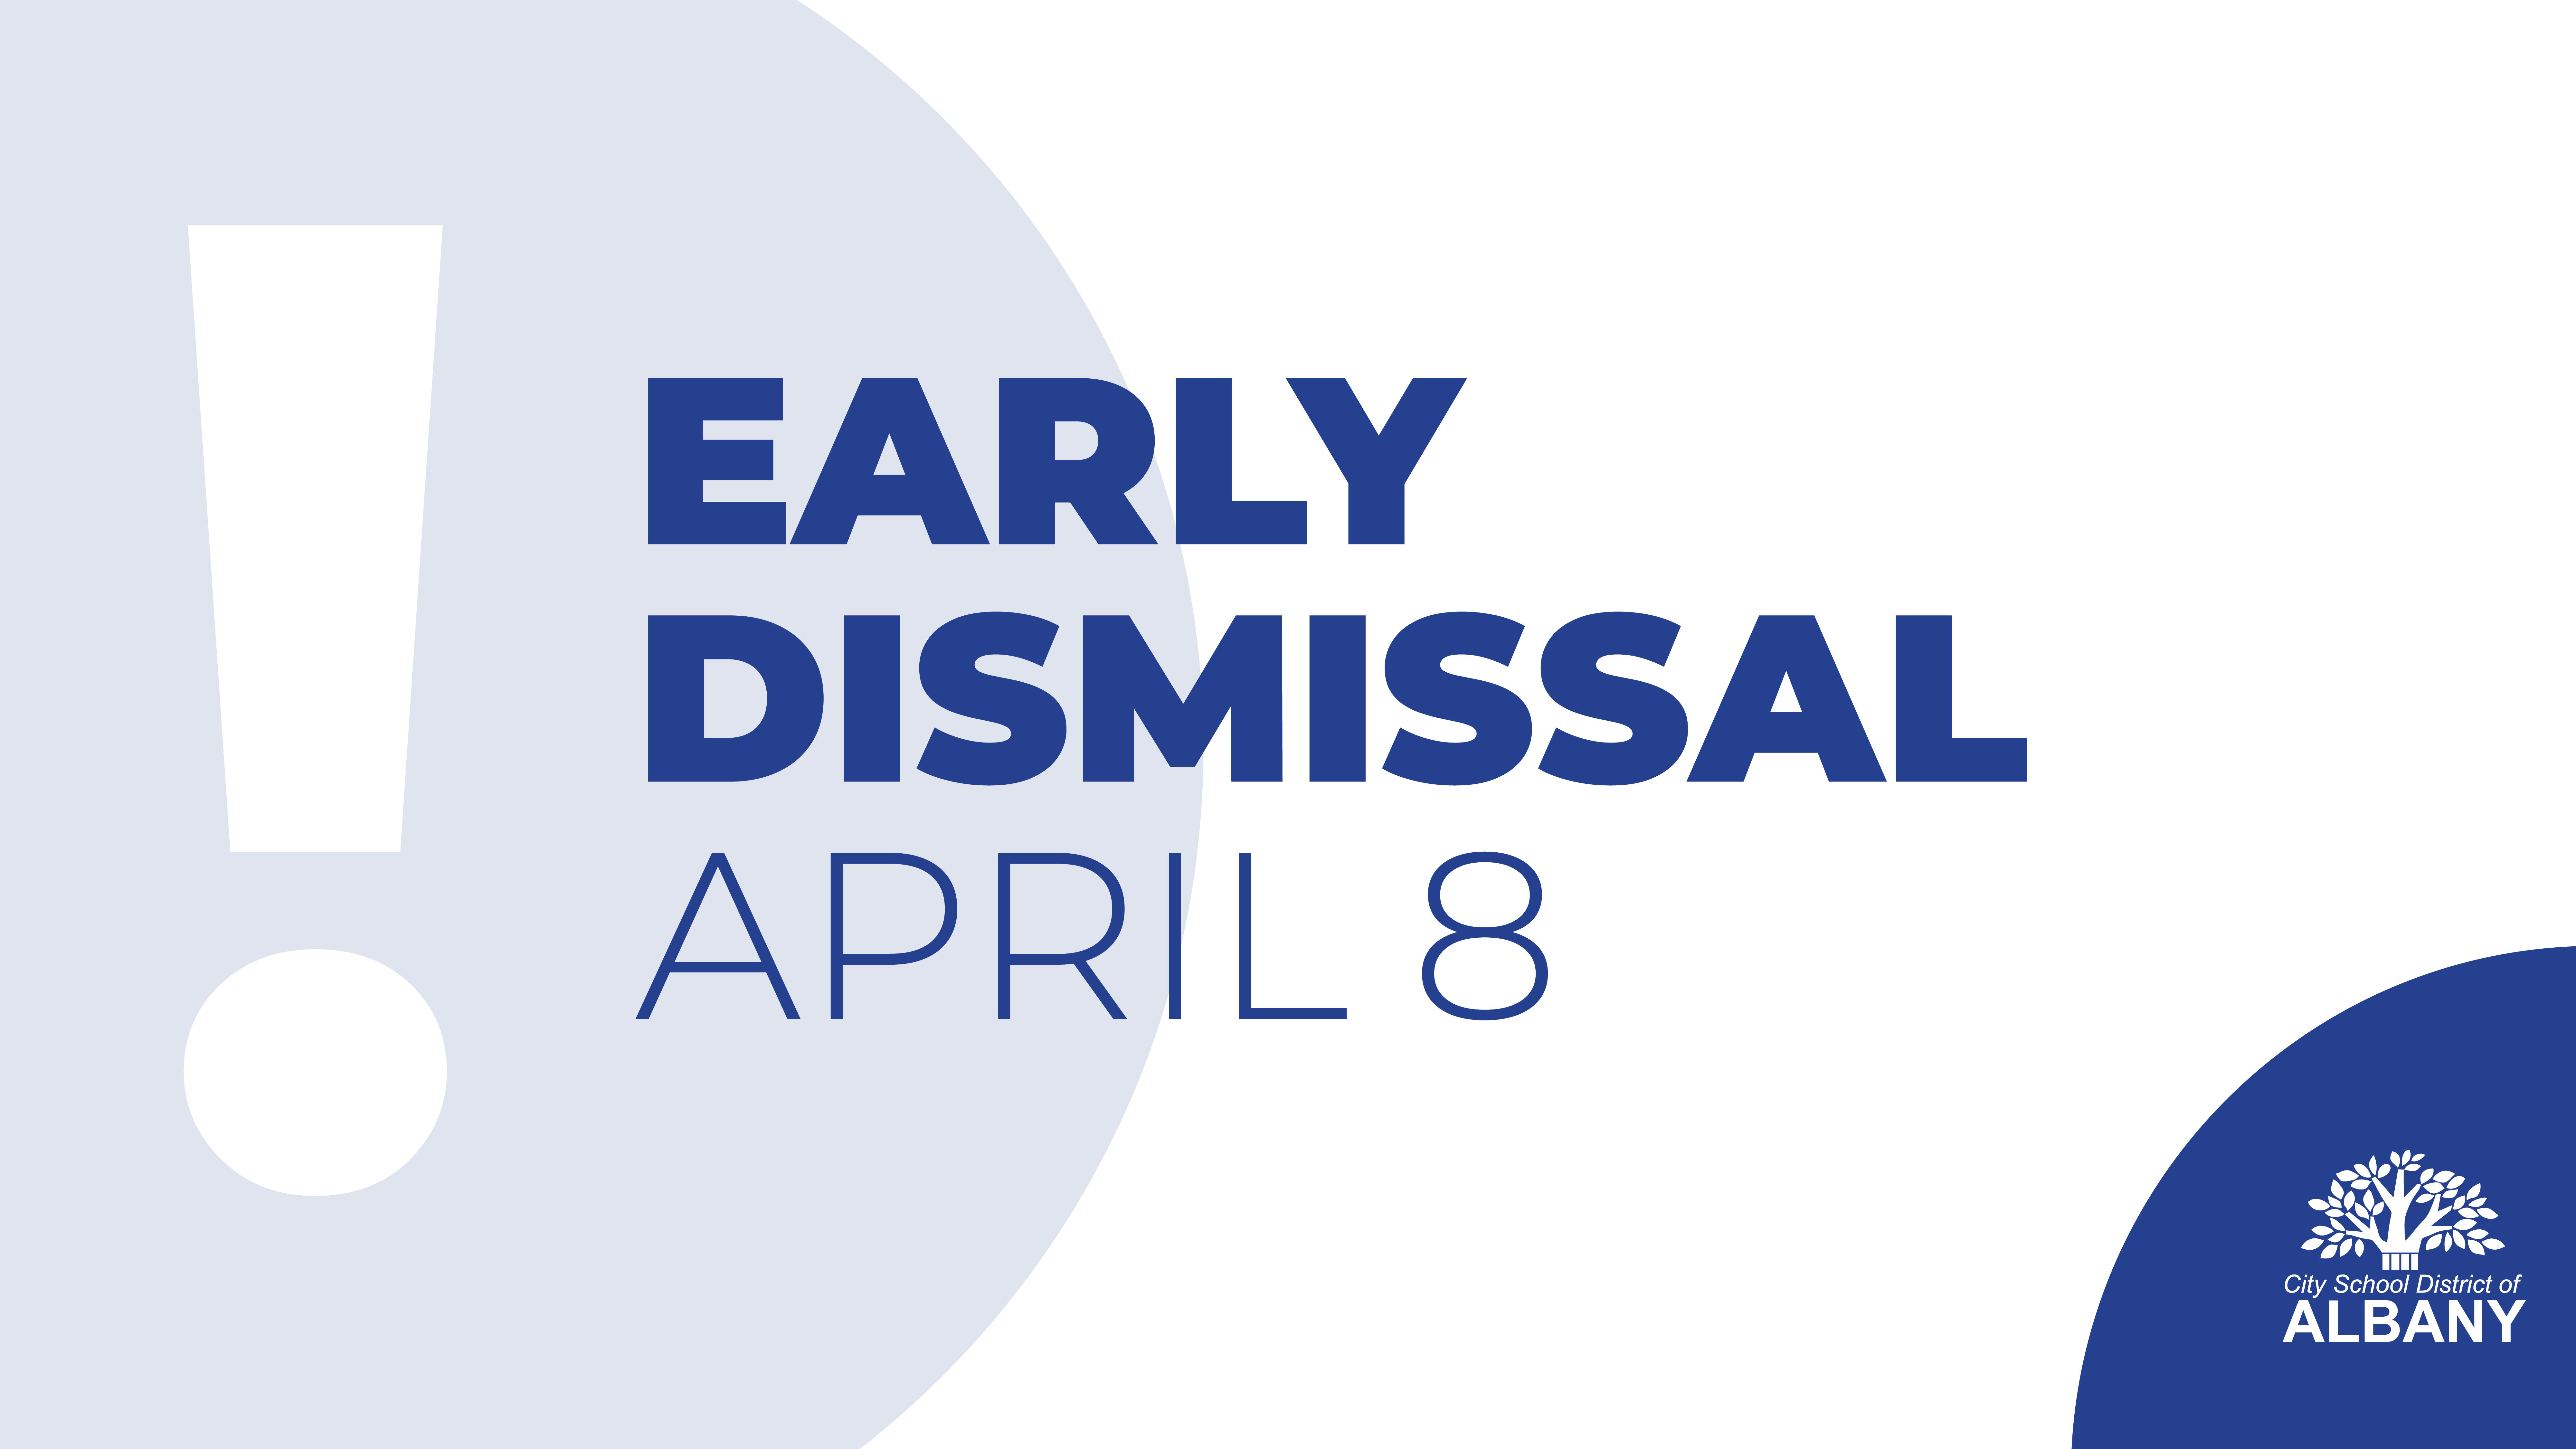 Graphic that says "EARLY DISMISSAL APRIL 8"